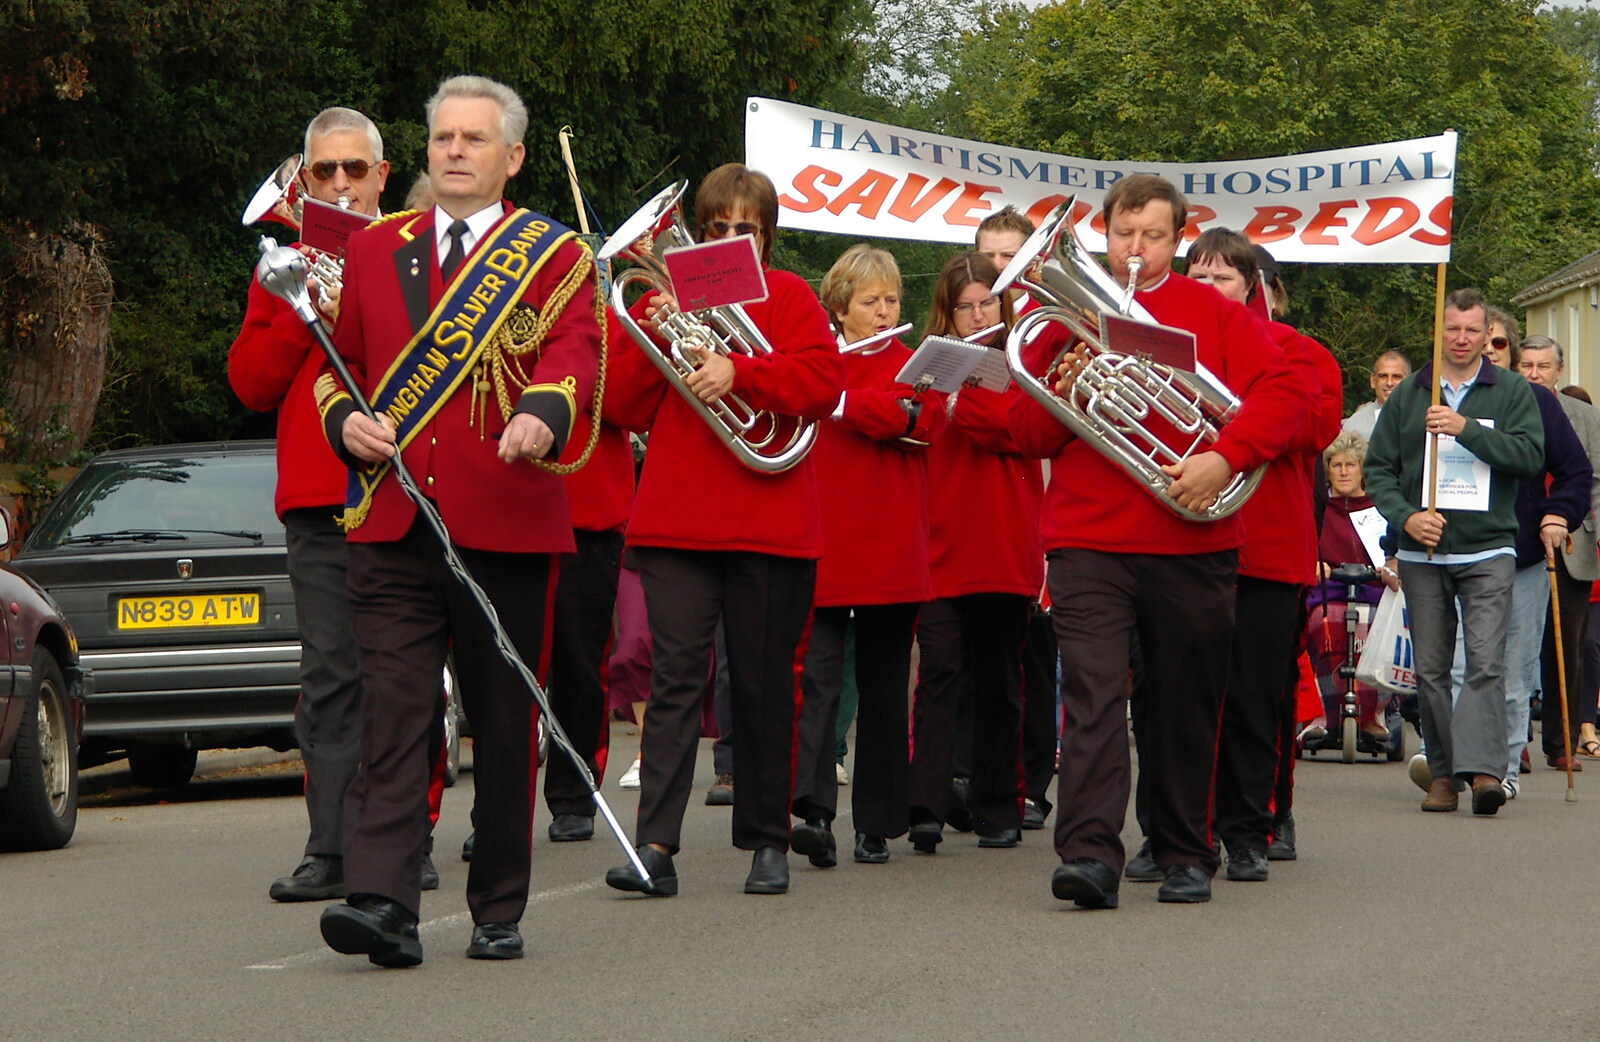 The Gislingham Silver Band provides marching music from Save Hartismere: a Hospital Closure Protest, Eye, Suffolk - 17th September 2005